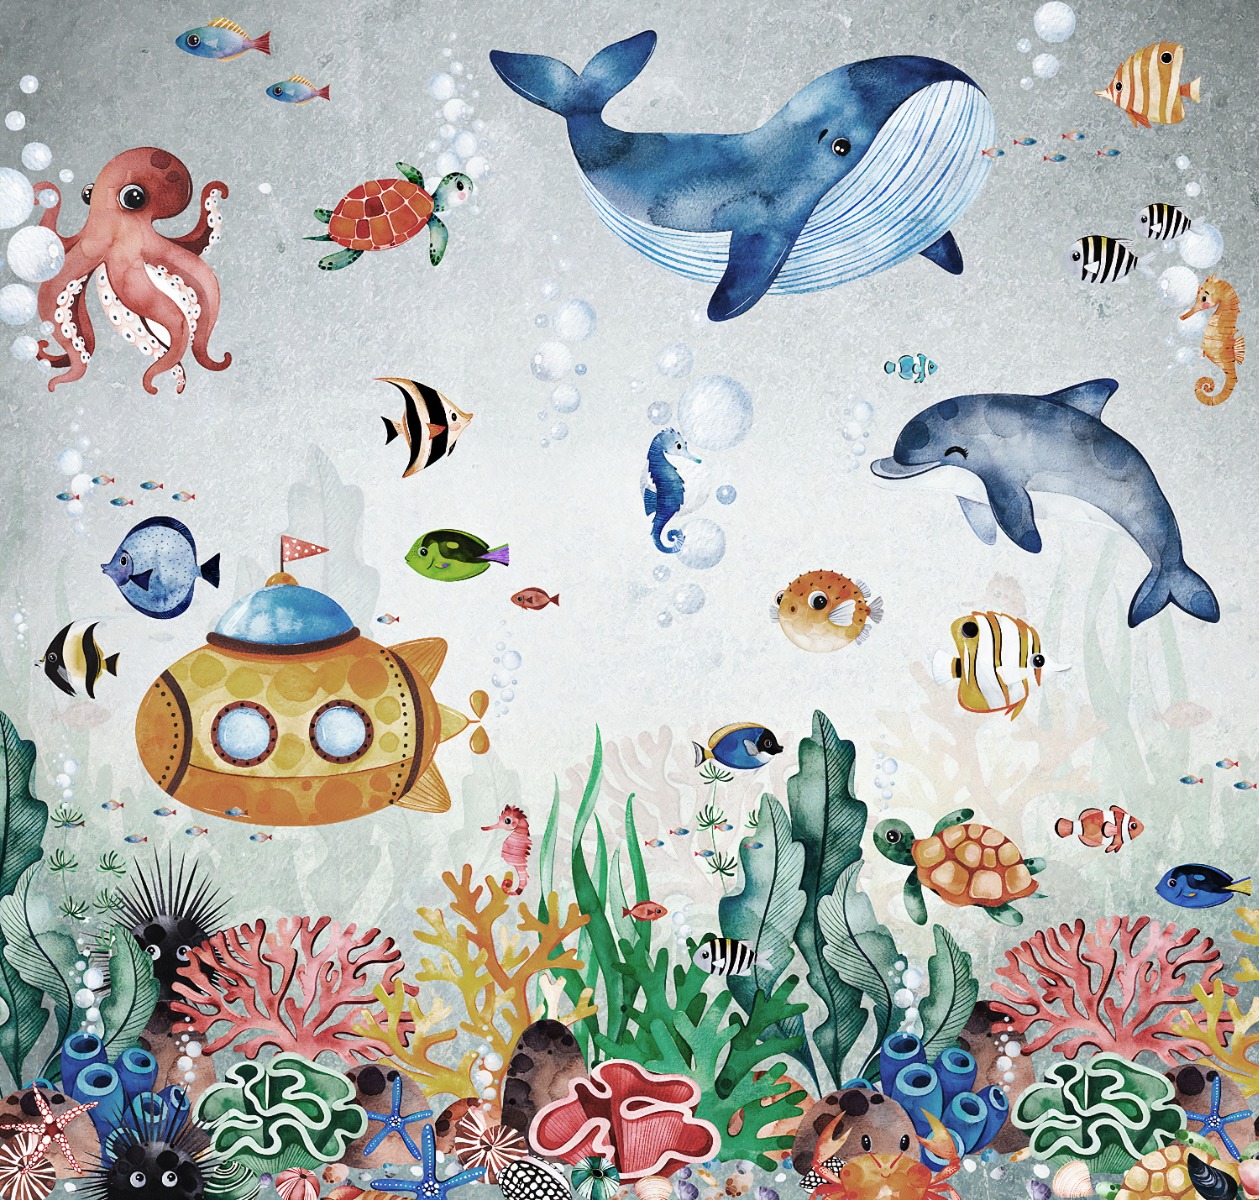 Colorful Wallpaper for Kids Room Designs from Wall Candy Arts